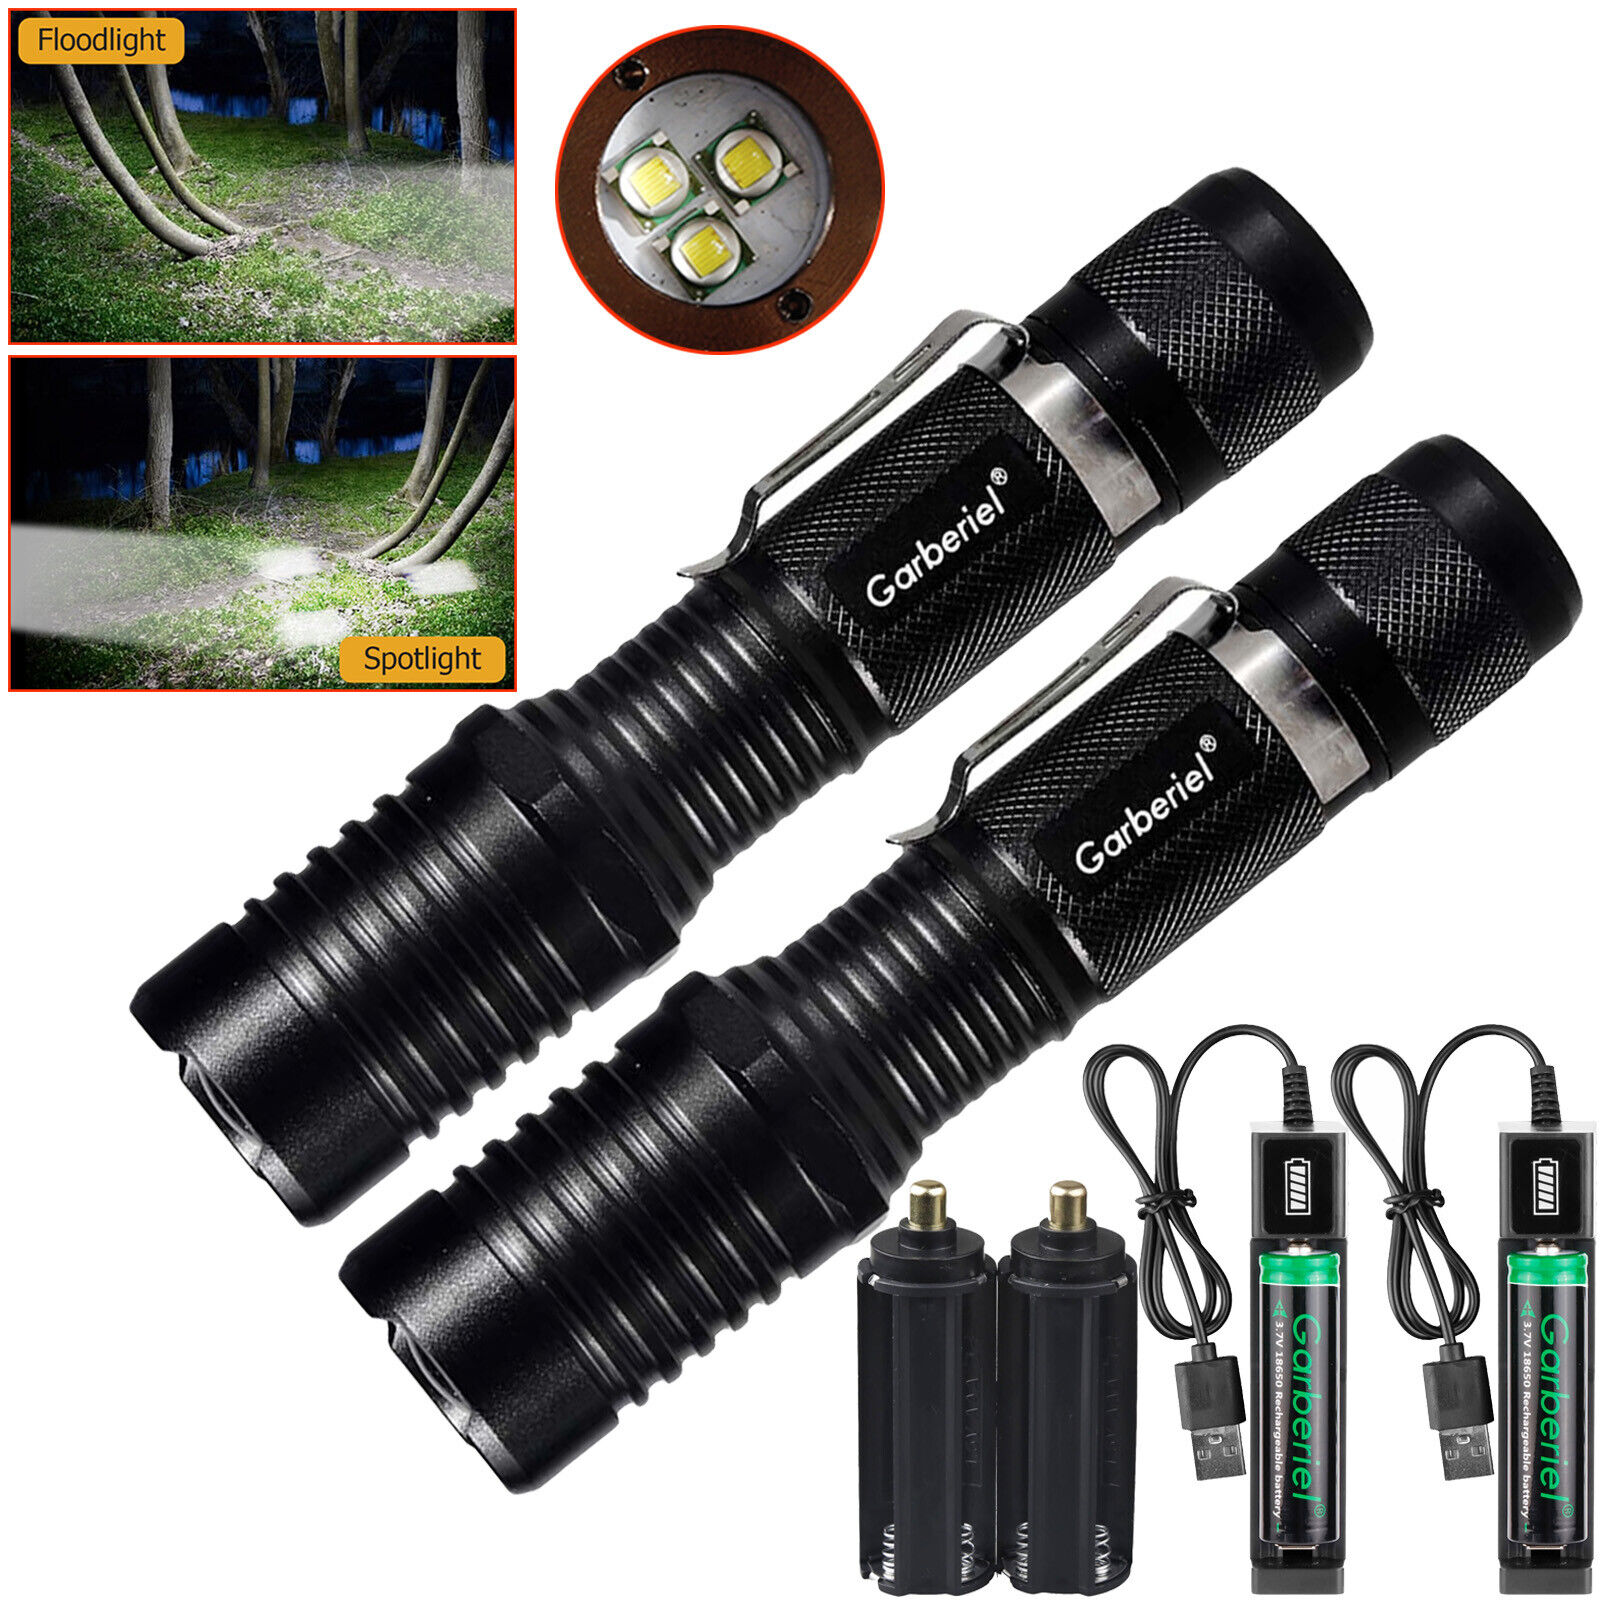 Super Bright Tactical LED Flashlight Zoom 3-T6 Police Torch 5 Modes Lamp Camping